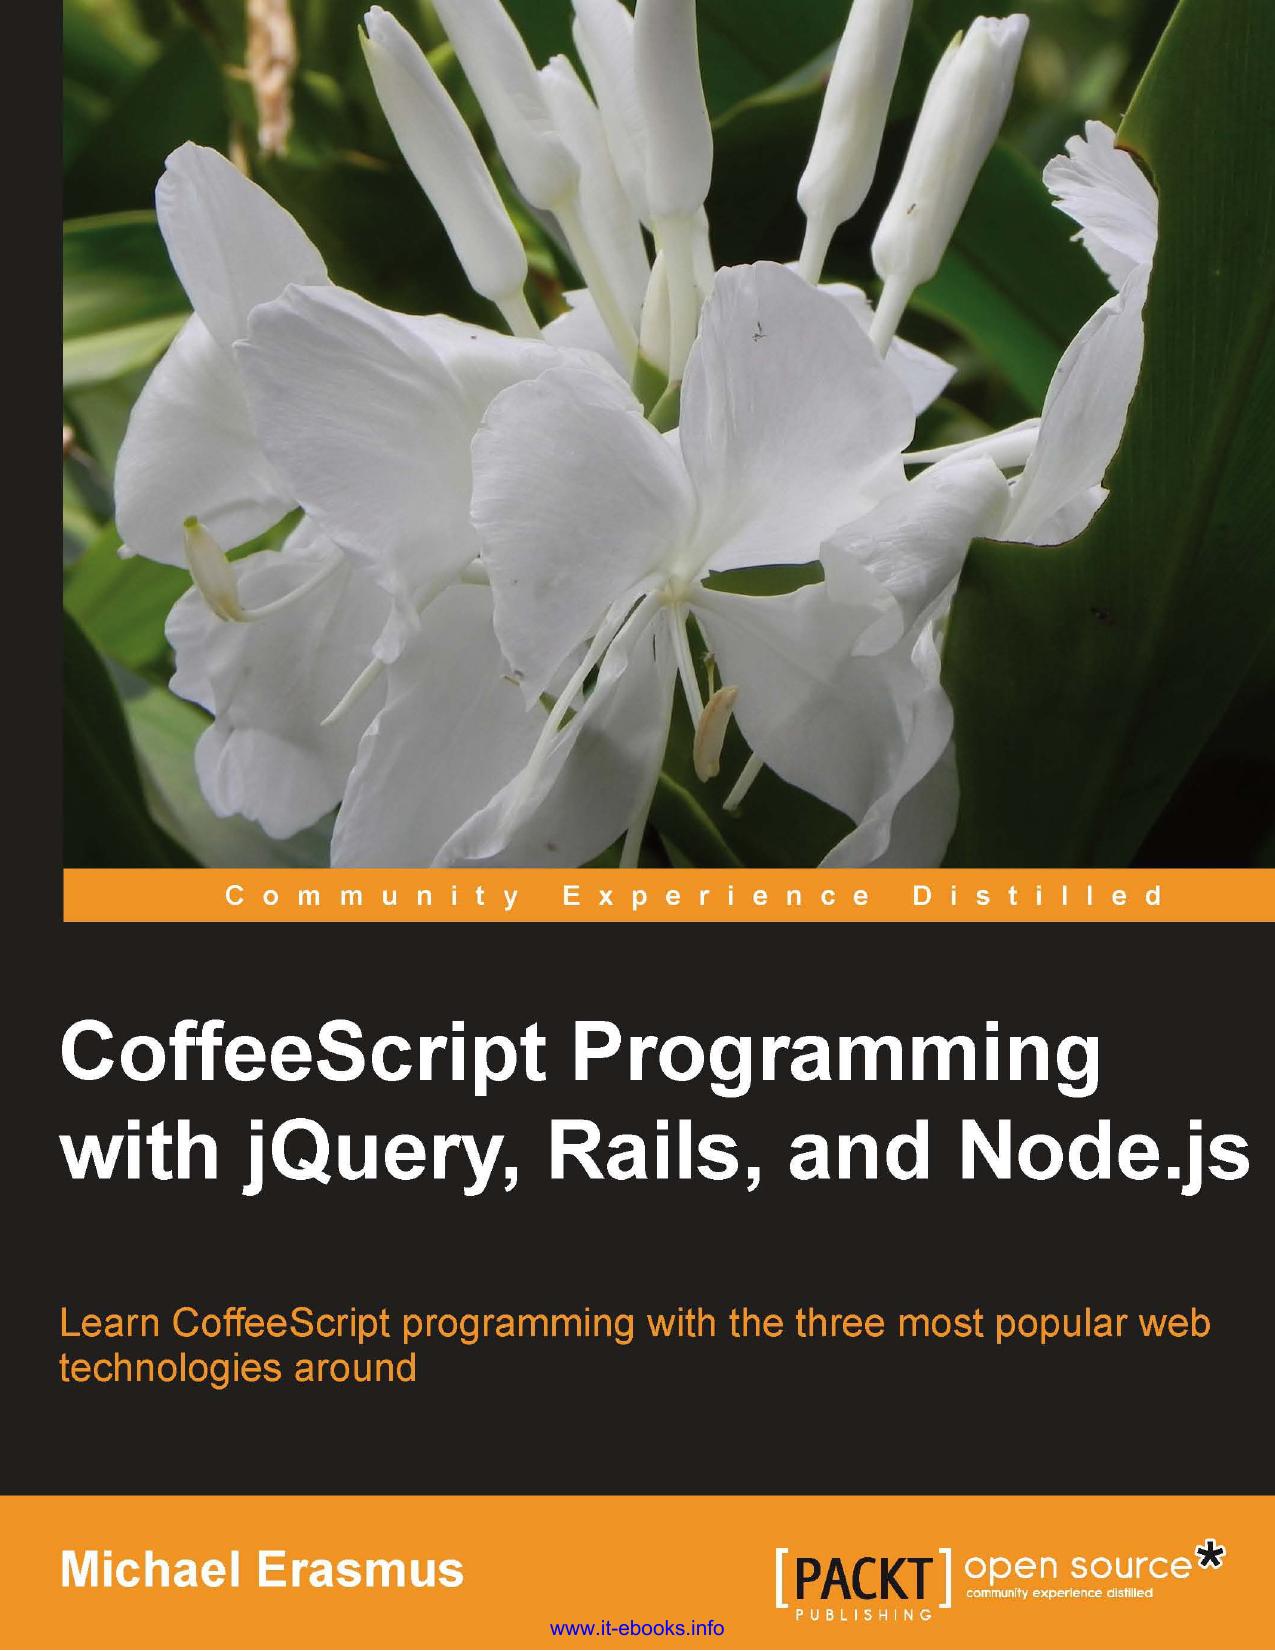 CoffeeScript Programming With JQuery, Rails, and Node. Js